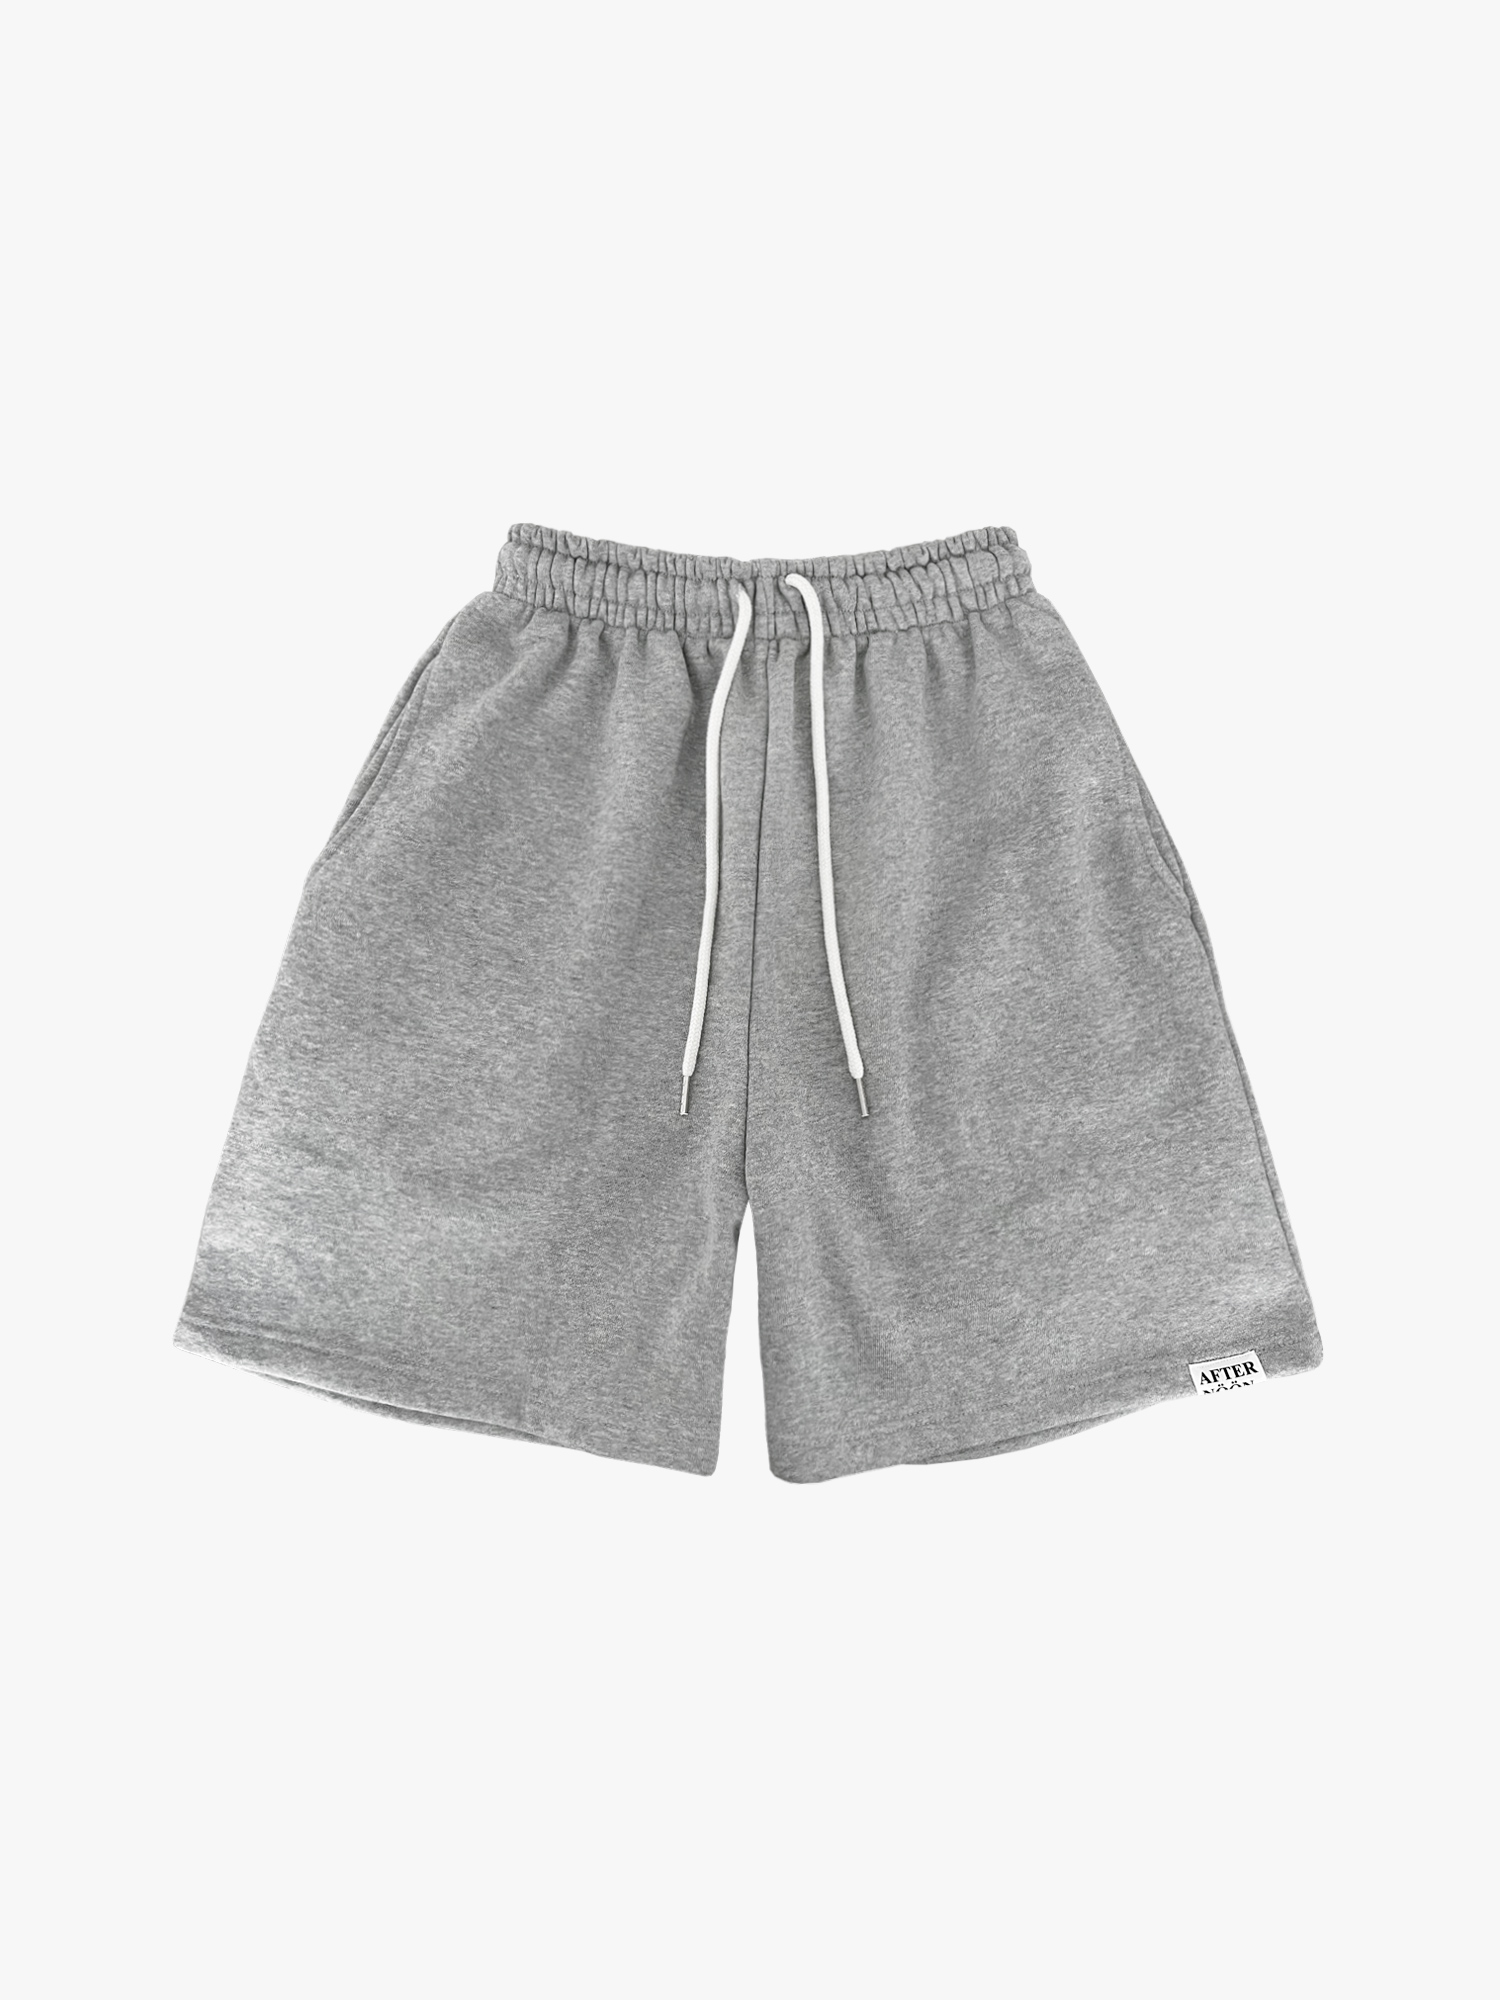 Afternoonlive Easy Sweat Short (Light Gray)